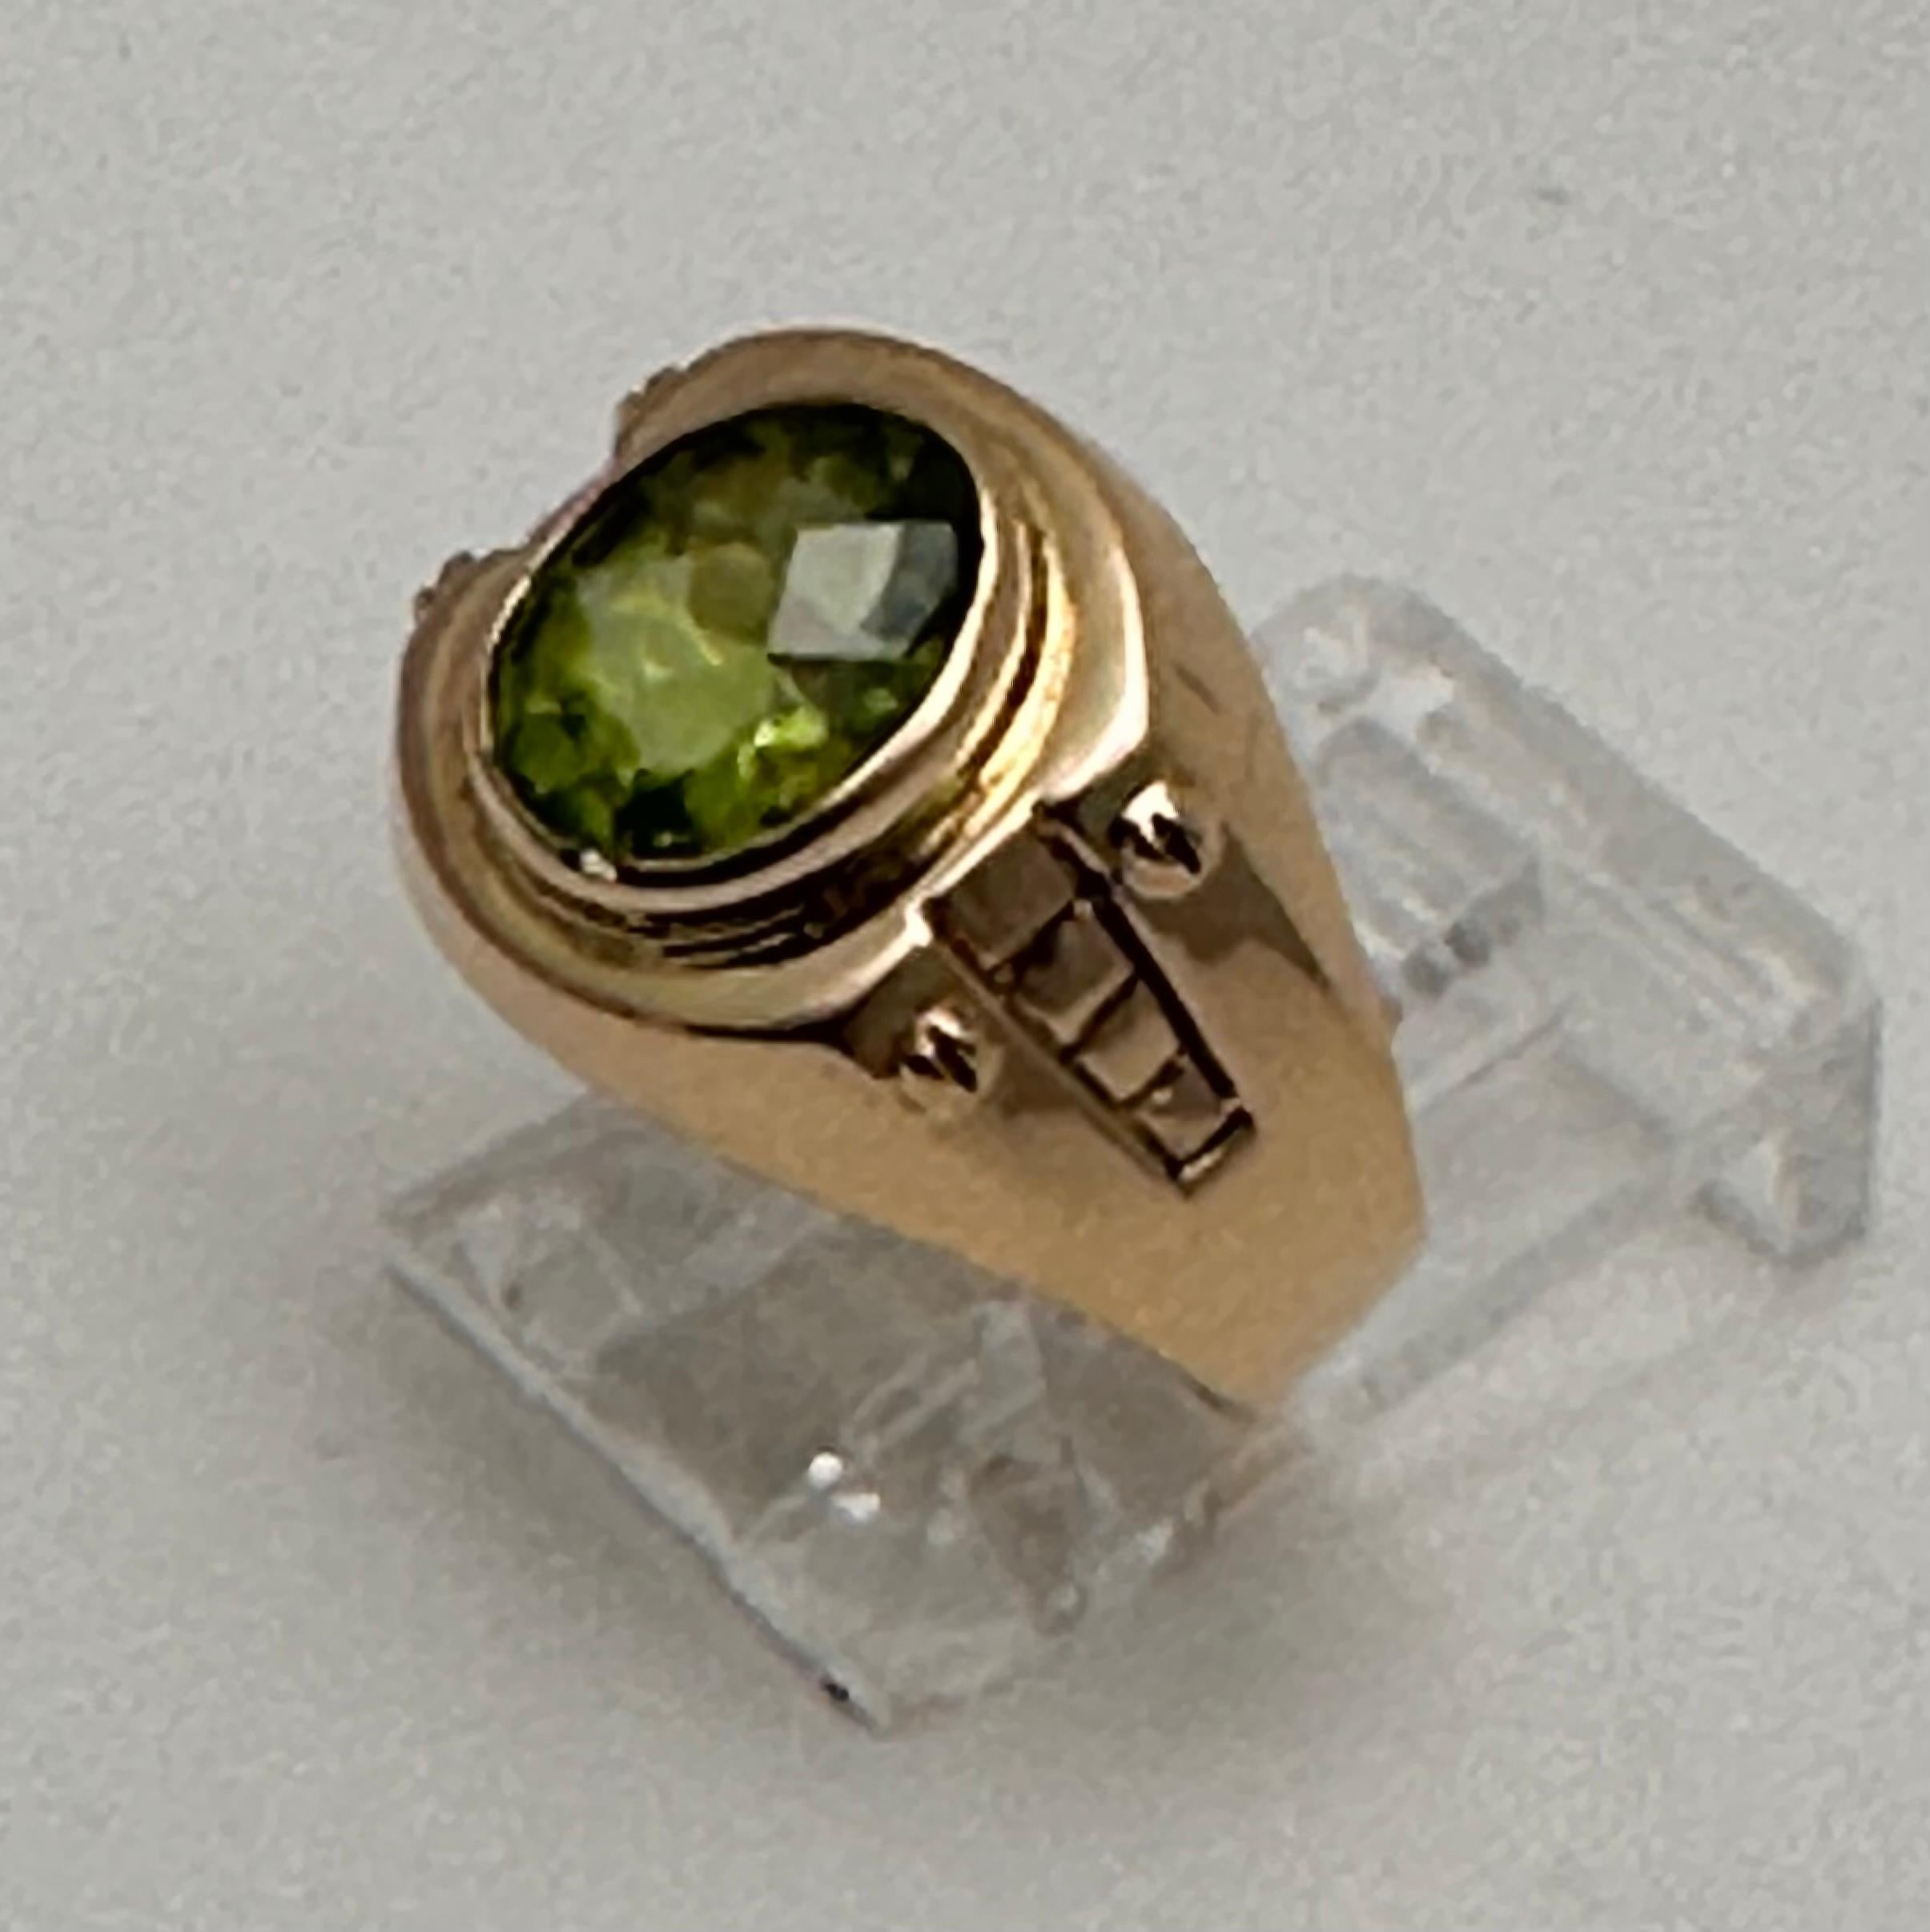 Oval Cut 21kt Yellow Gold 8mm x 9mm Oval Peridot Ring Size 5 3/4 For Sale